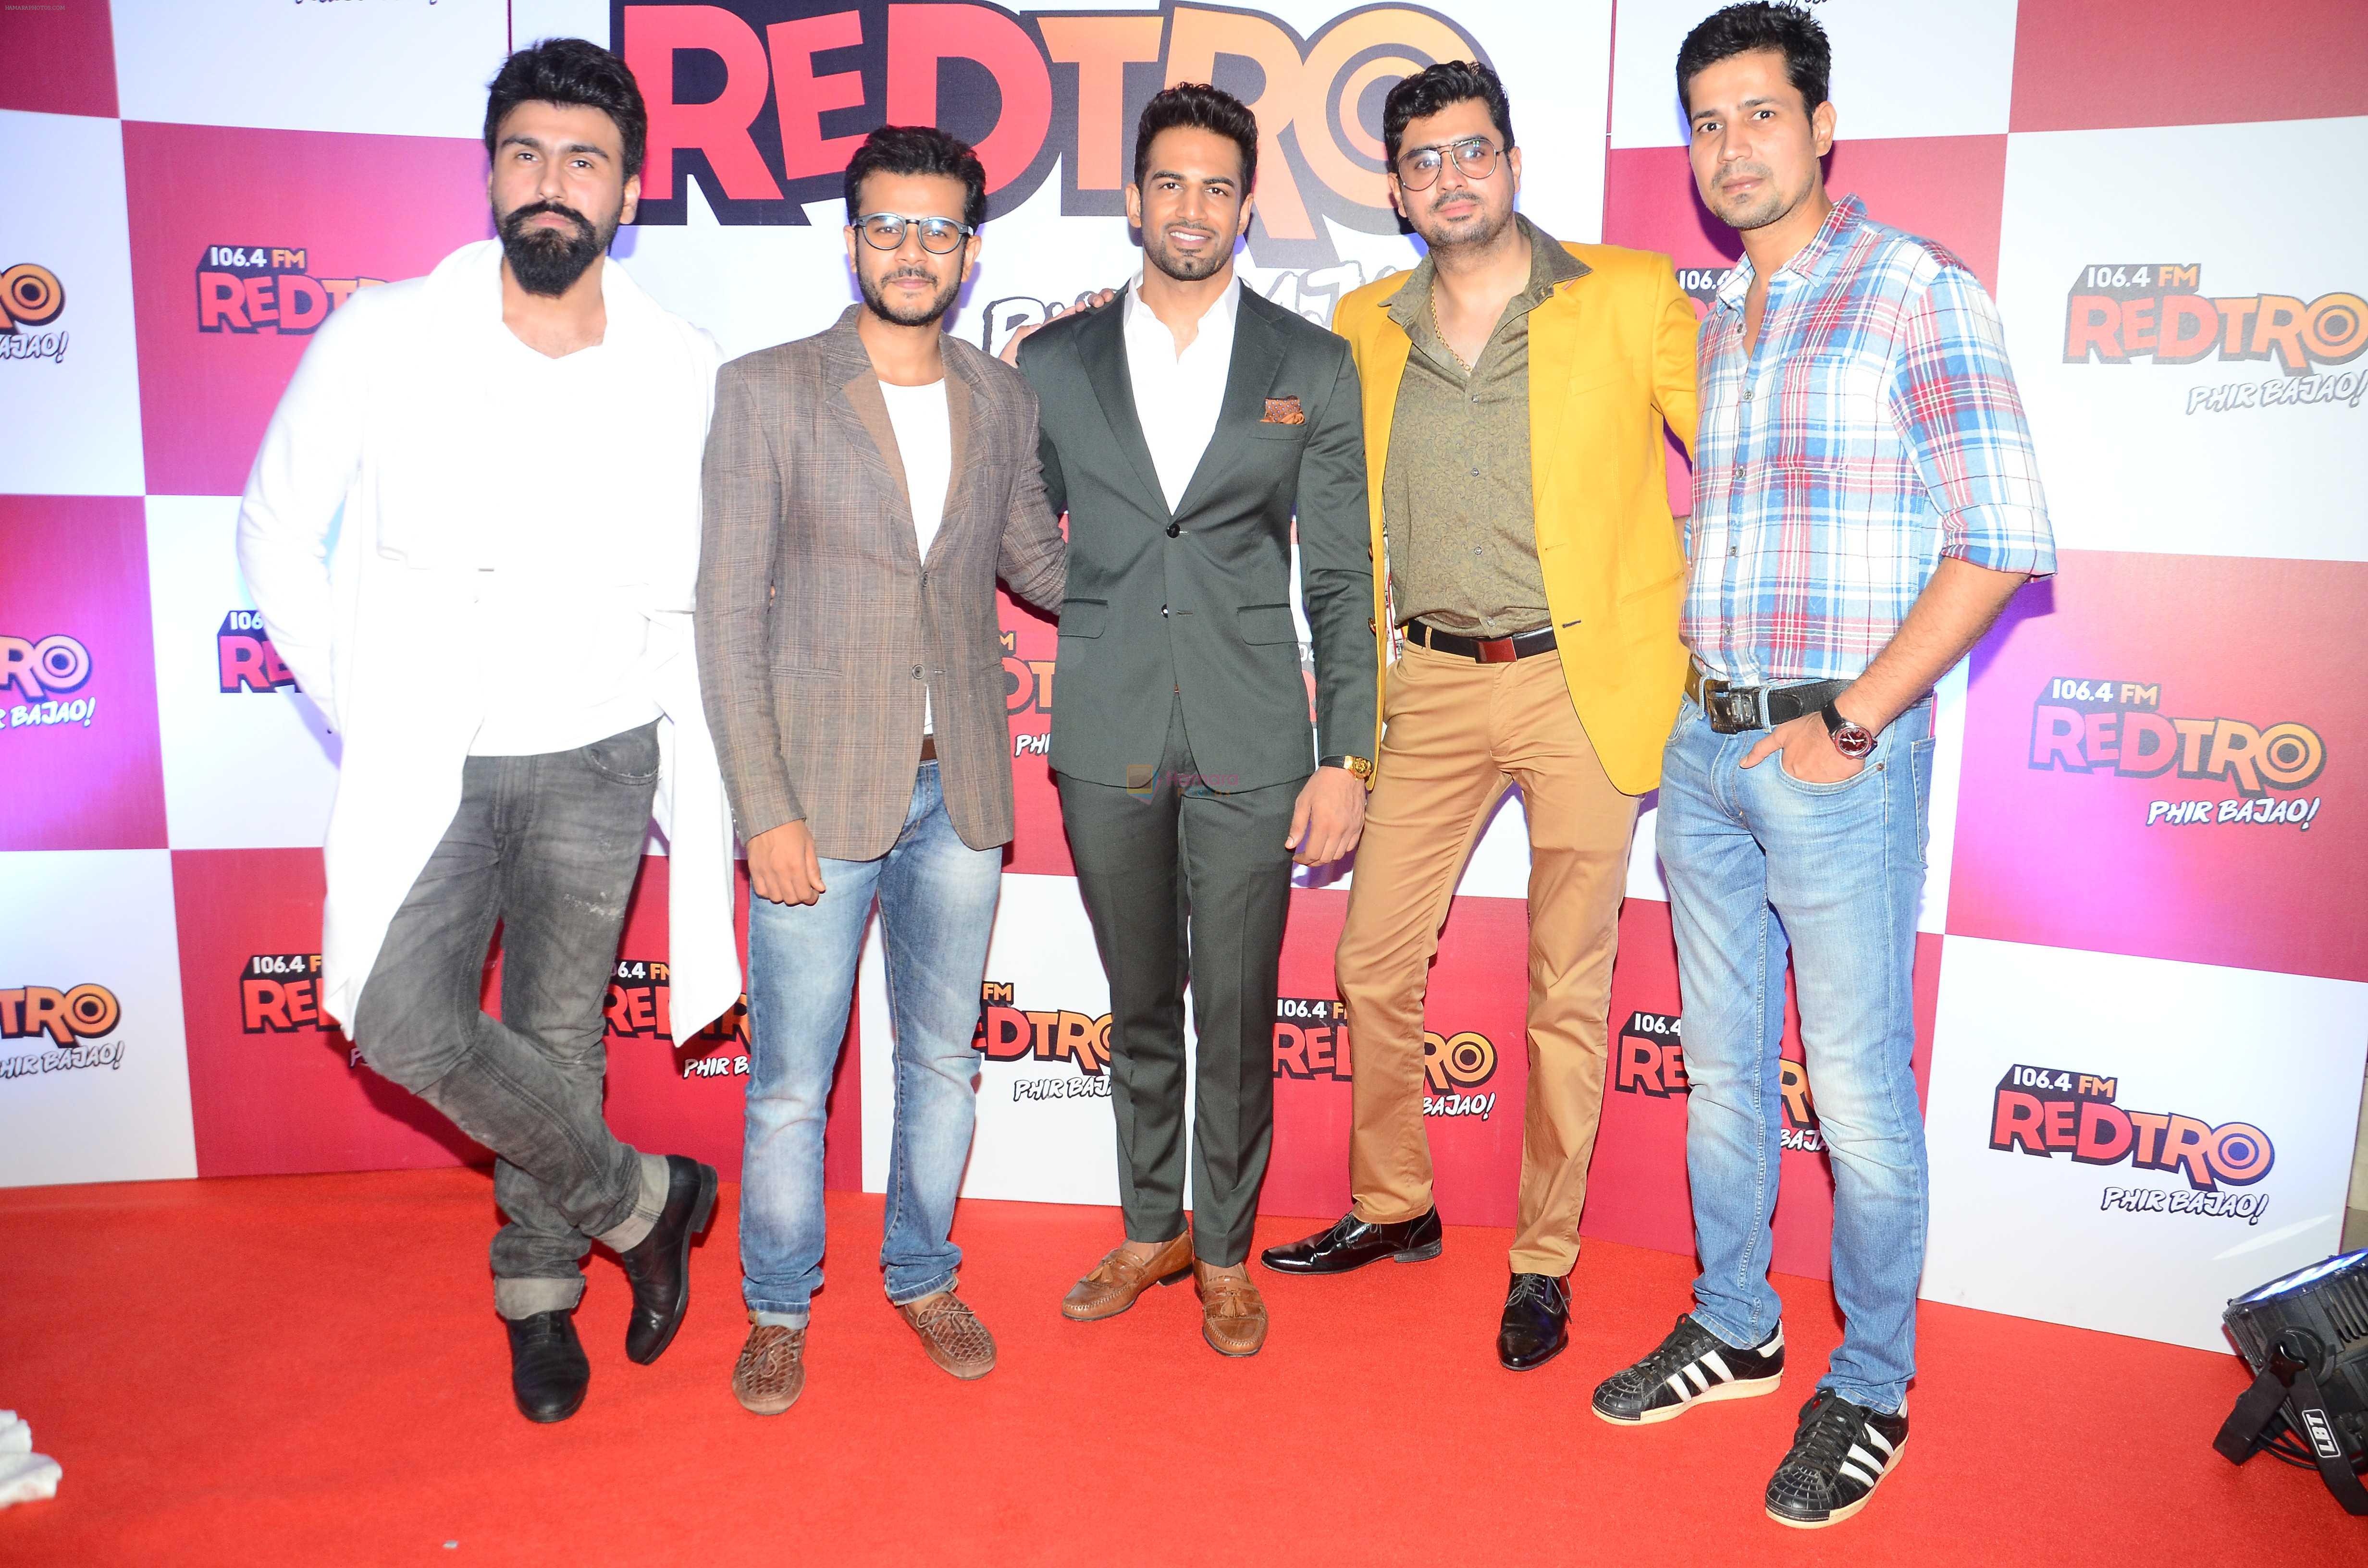 Aarya Babbar, Jay Soni, Sumeet Vyas, Pritam Singh, Upen Patel during the party organised by Red FM to celebrate the launch of its new radio station Redtro 106.4 in Mumbai India on 22 July 2016